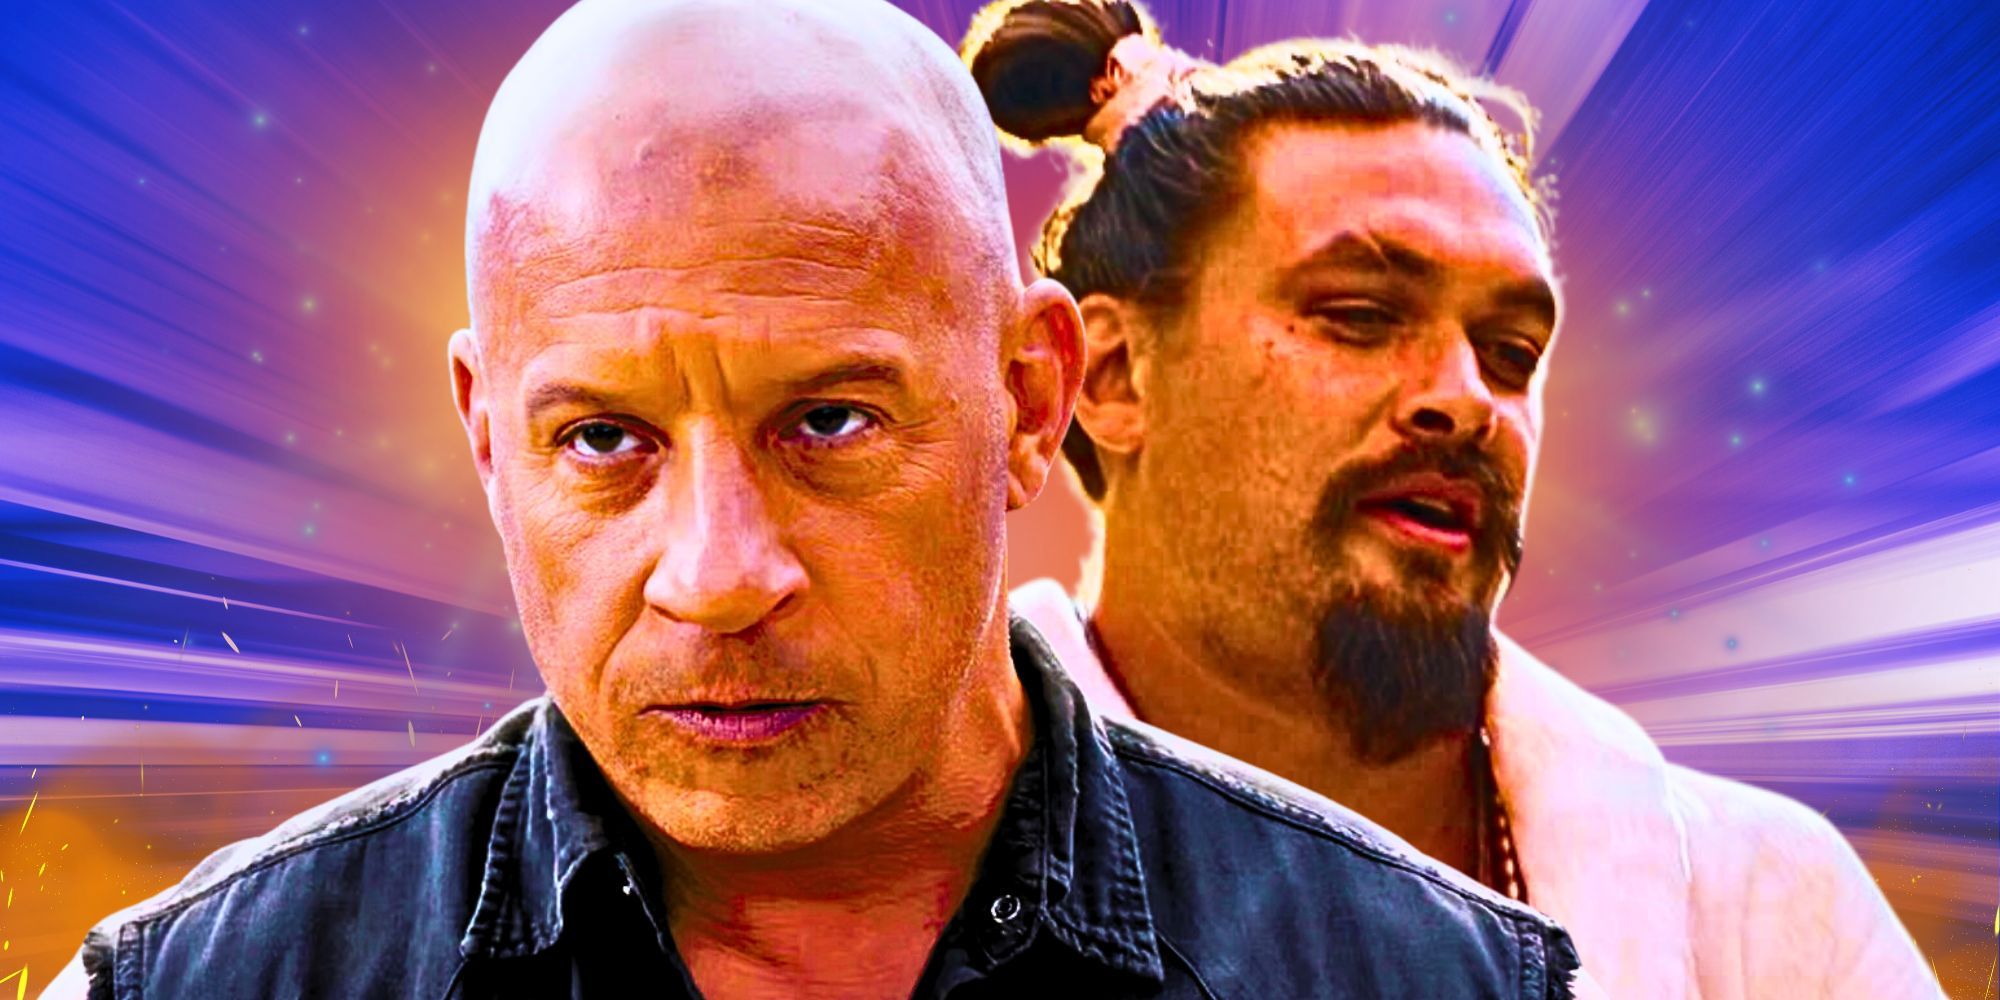 A custom of Vin Diesel as Dominic Toretto and Jason Momoa as Dante Reyes in Fast X